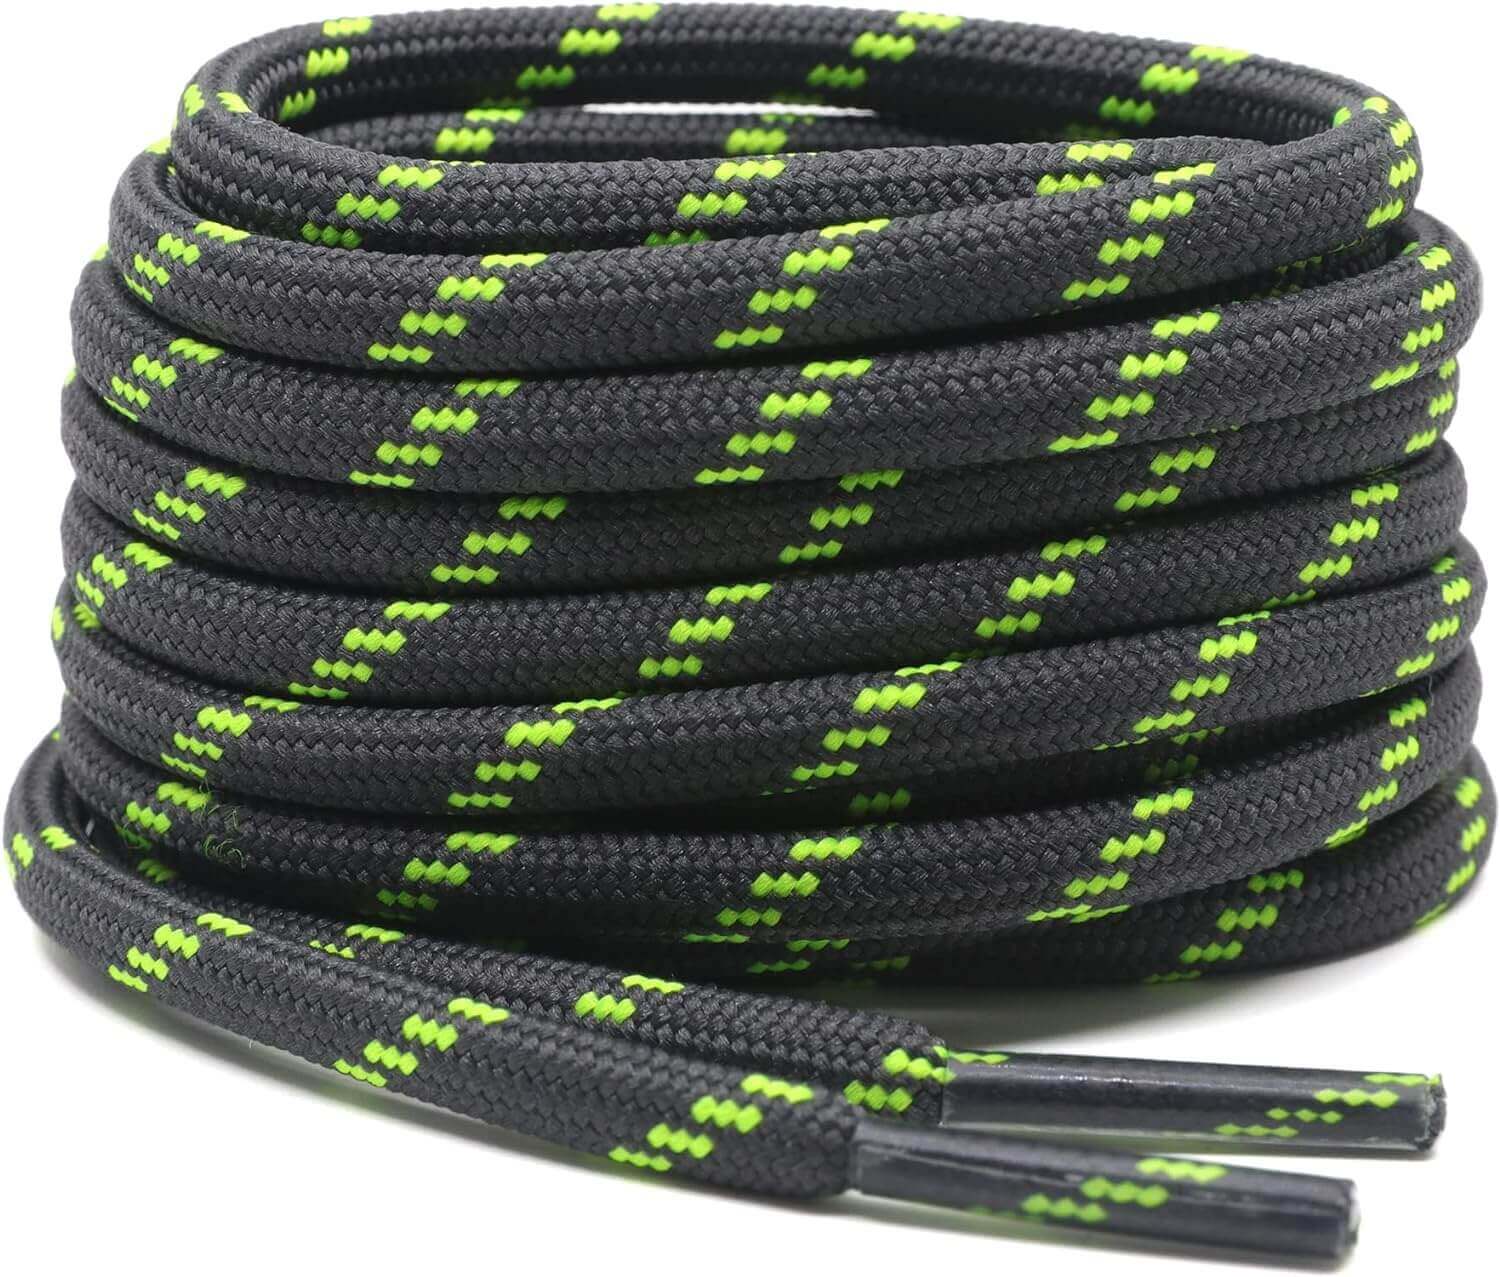 Shop The Latest >2 Pair Work Boot Laces - Hiking, Walking, Shoelaces > *Only $13.22*> From The Top Brand > *DELELEl* > Shop Now and Get Free Shipping On Orders Over $45.00 >*Shop Earth Foot*